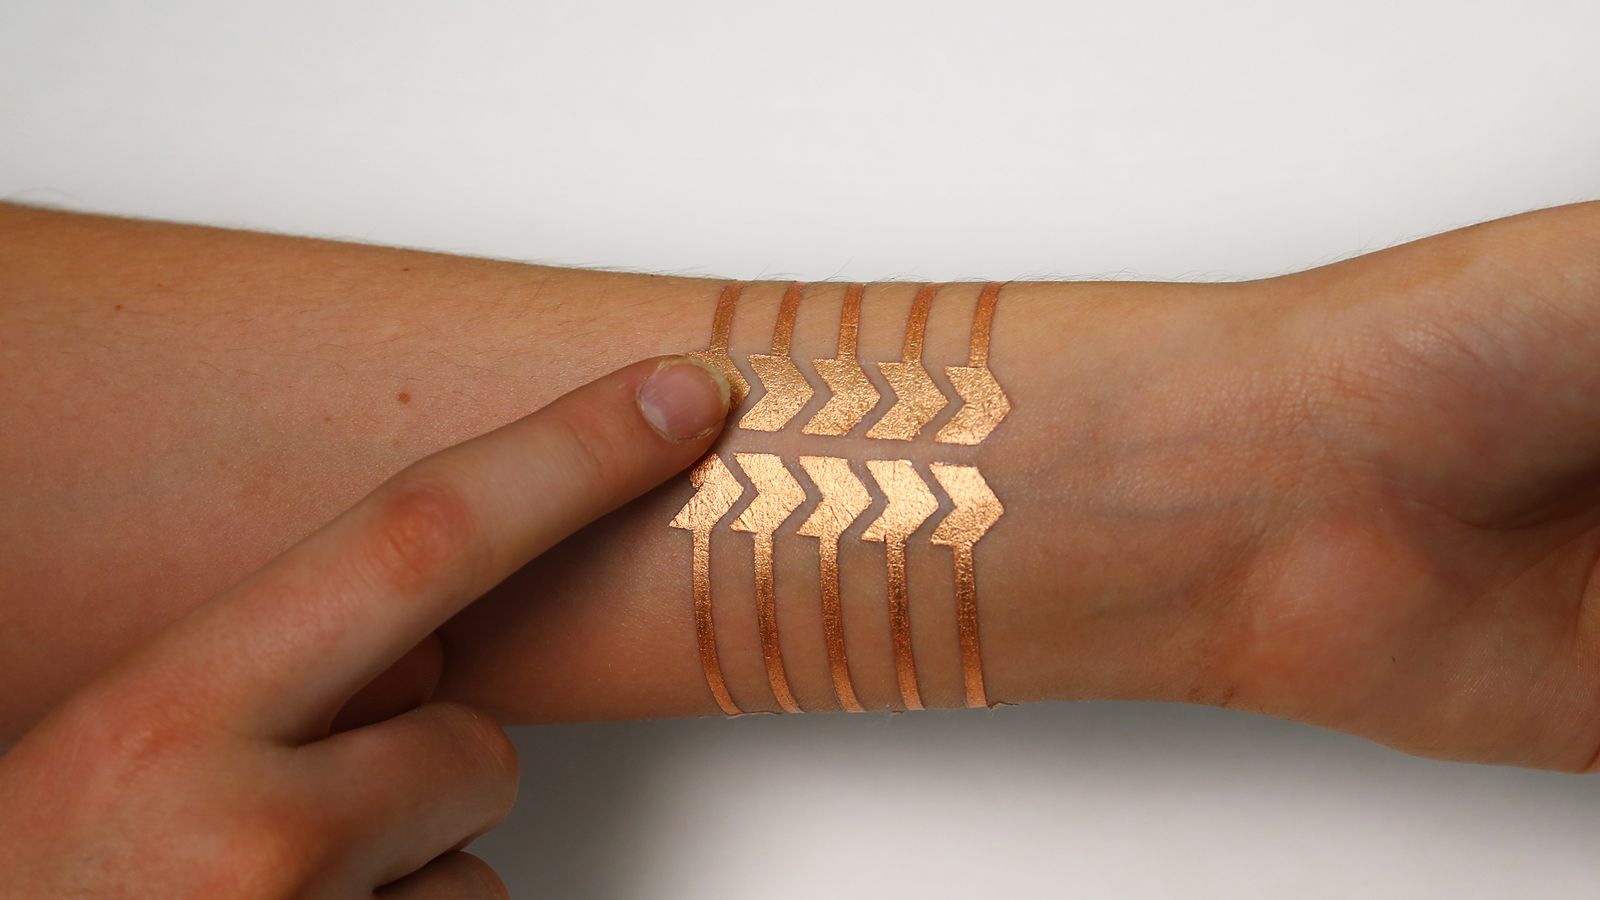 MIT and Microsoft Research made a 'smart' tattoo that remotely controls your phone - The Verge